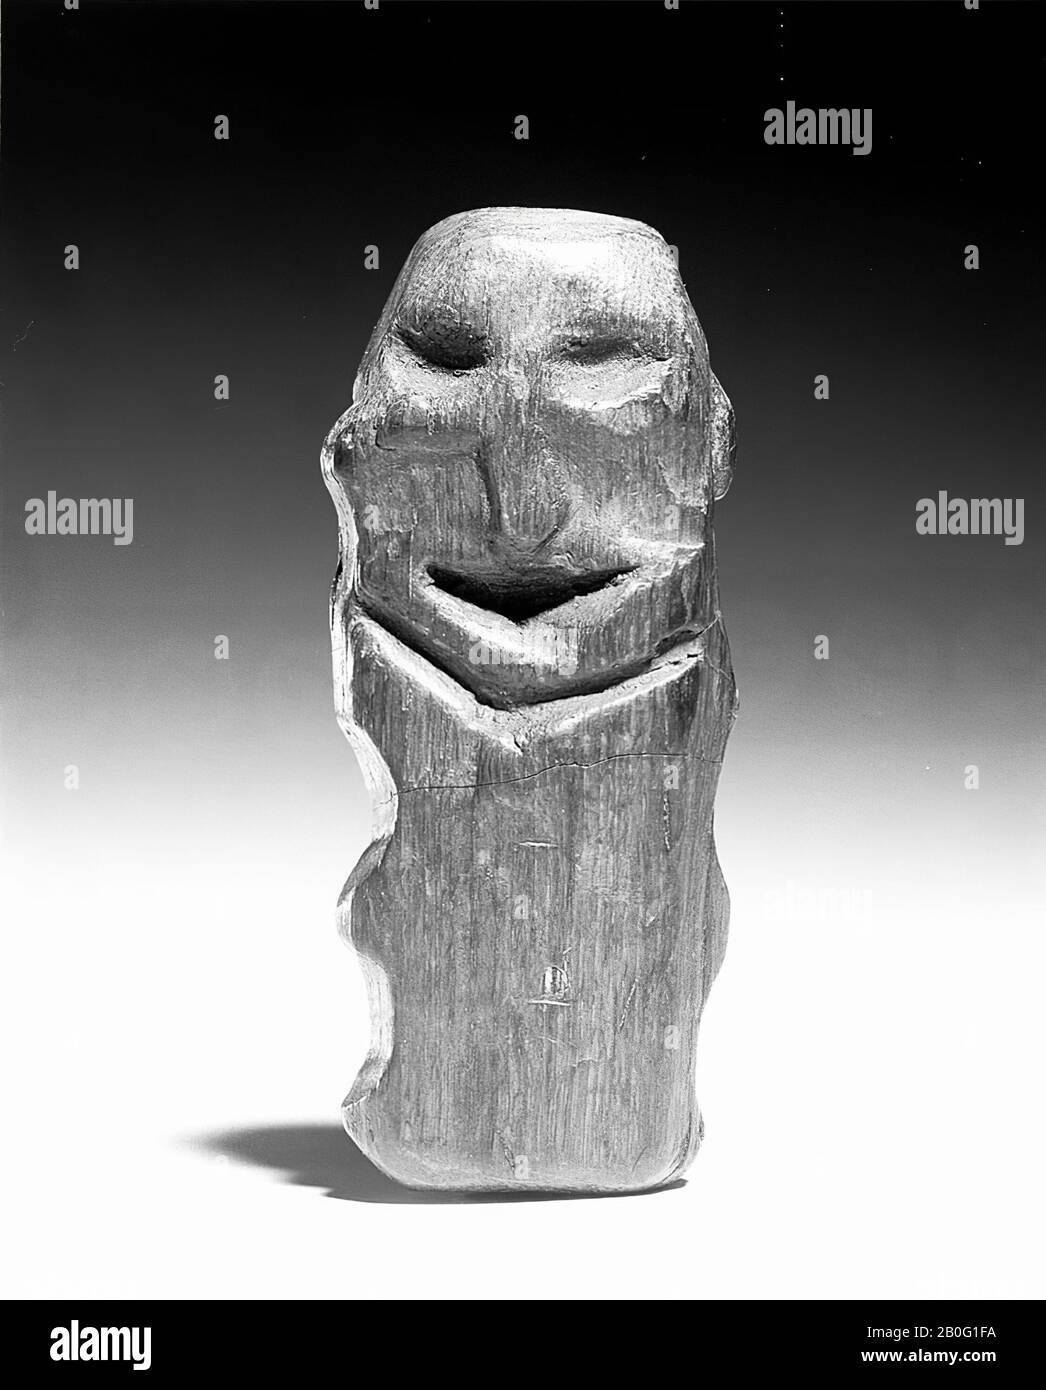 wooden sculpture. A big head on a small body, to which small protrusions must represent the limbs. Eyes and mouth are carved, as well as the separation between head and trunk. Because the wood has been cut away from the cheeks, the nose protrudes slightly. The ears are indicated on the sides as nodules. The backside is modified, idol, organic, wood, 12.4 x 5.1 x 3.1 cm, prehistory 5400-5300 BC, Netherlands, North Brabant, Moerdijk, Willemstad, Volkerak Stock Photo